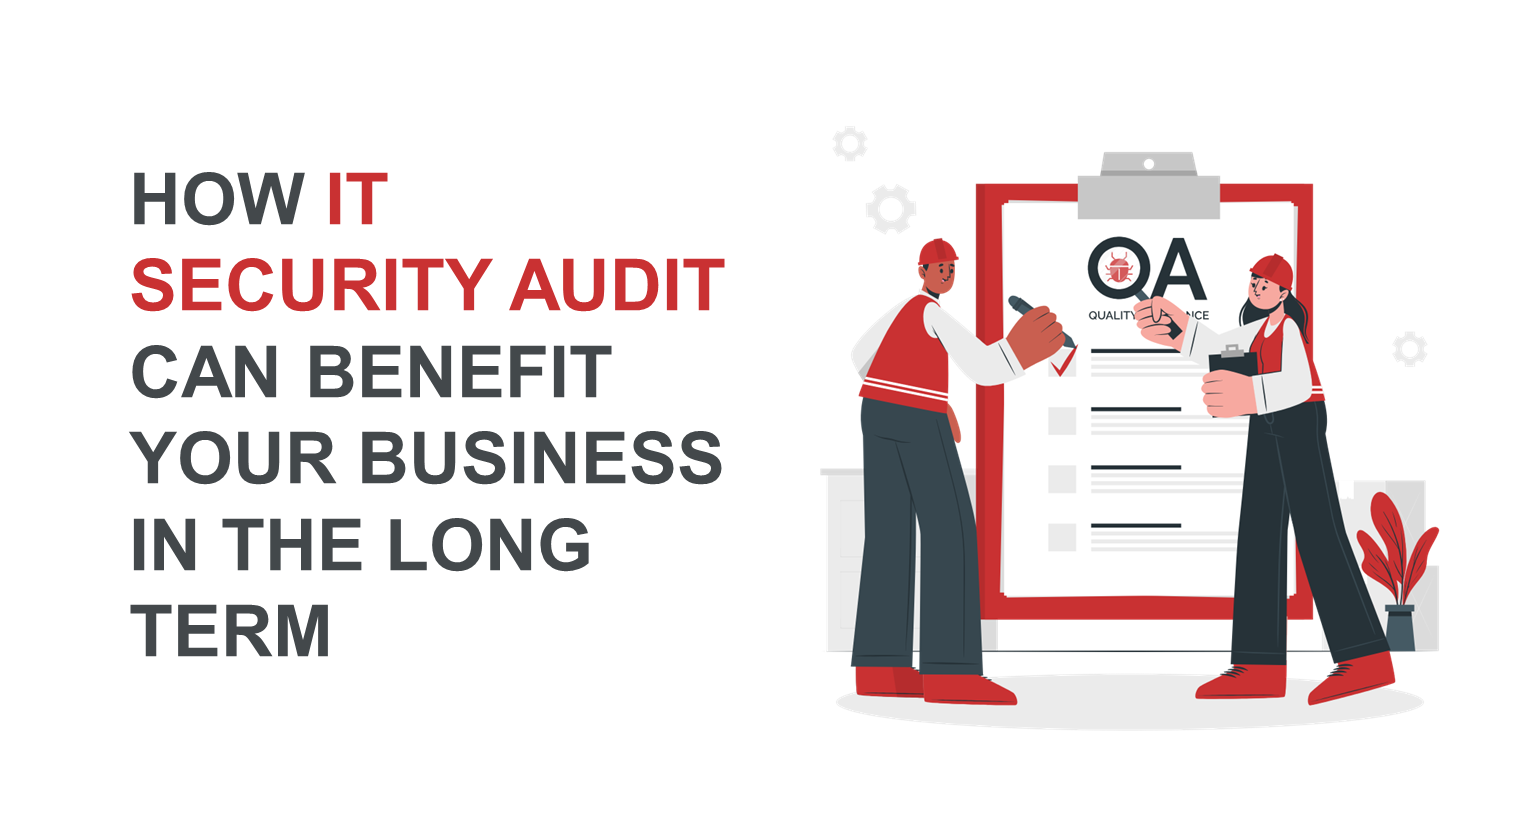 How IT security audit can benefit your business in the long term